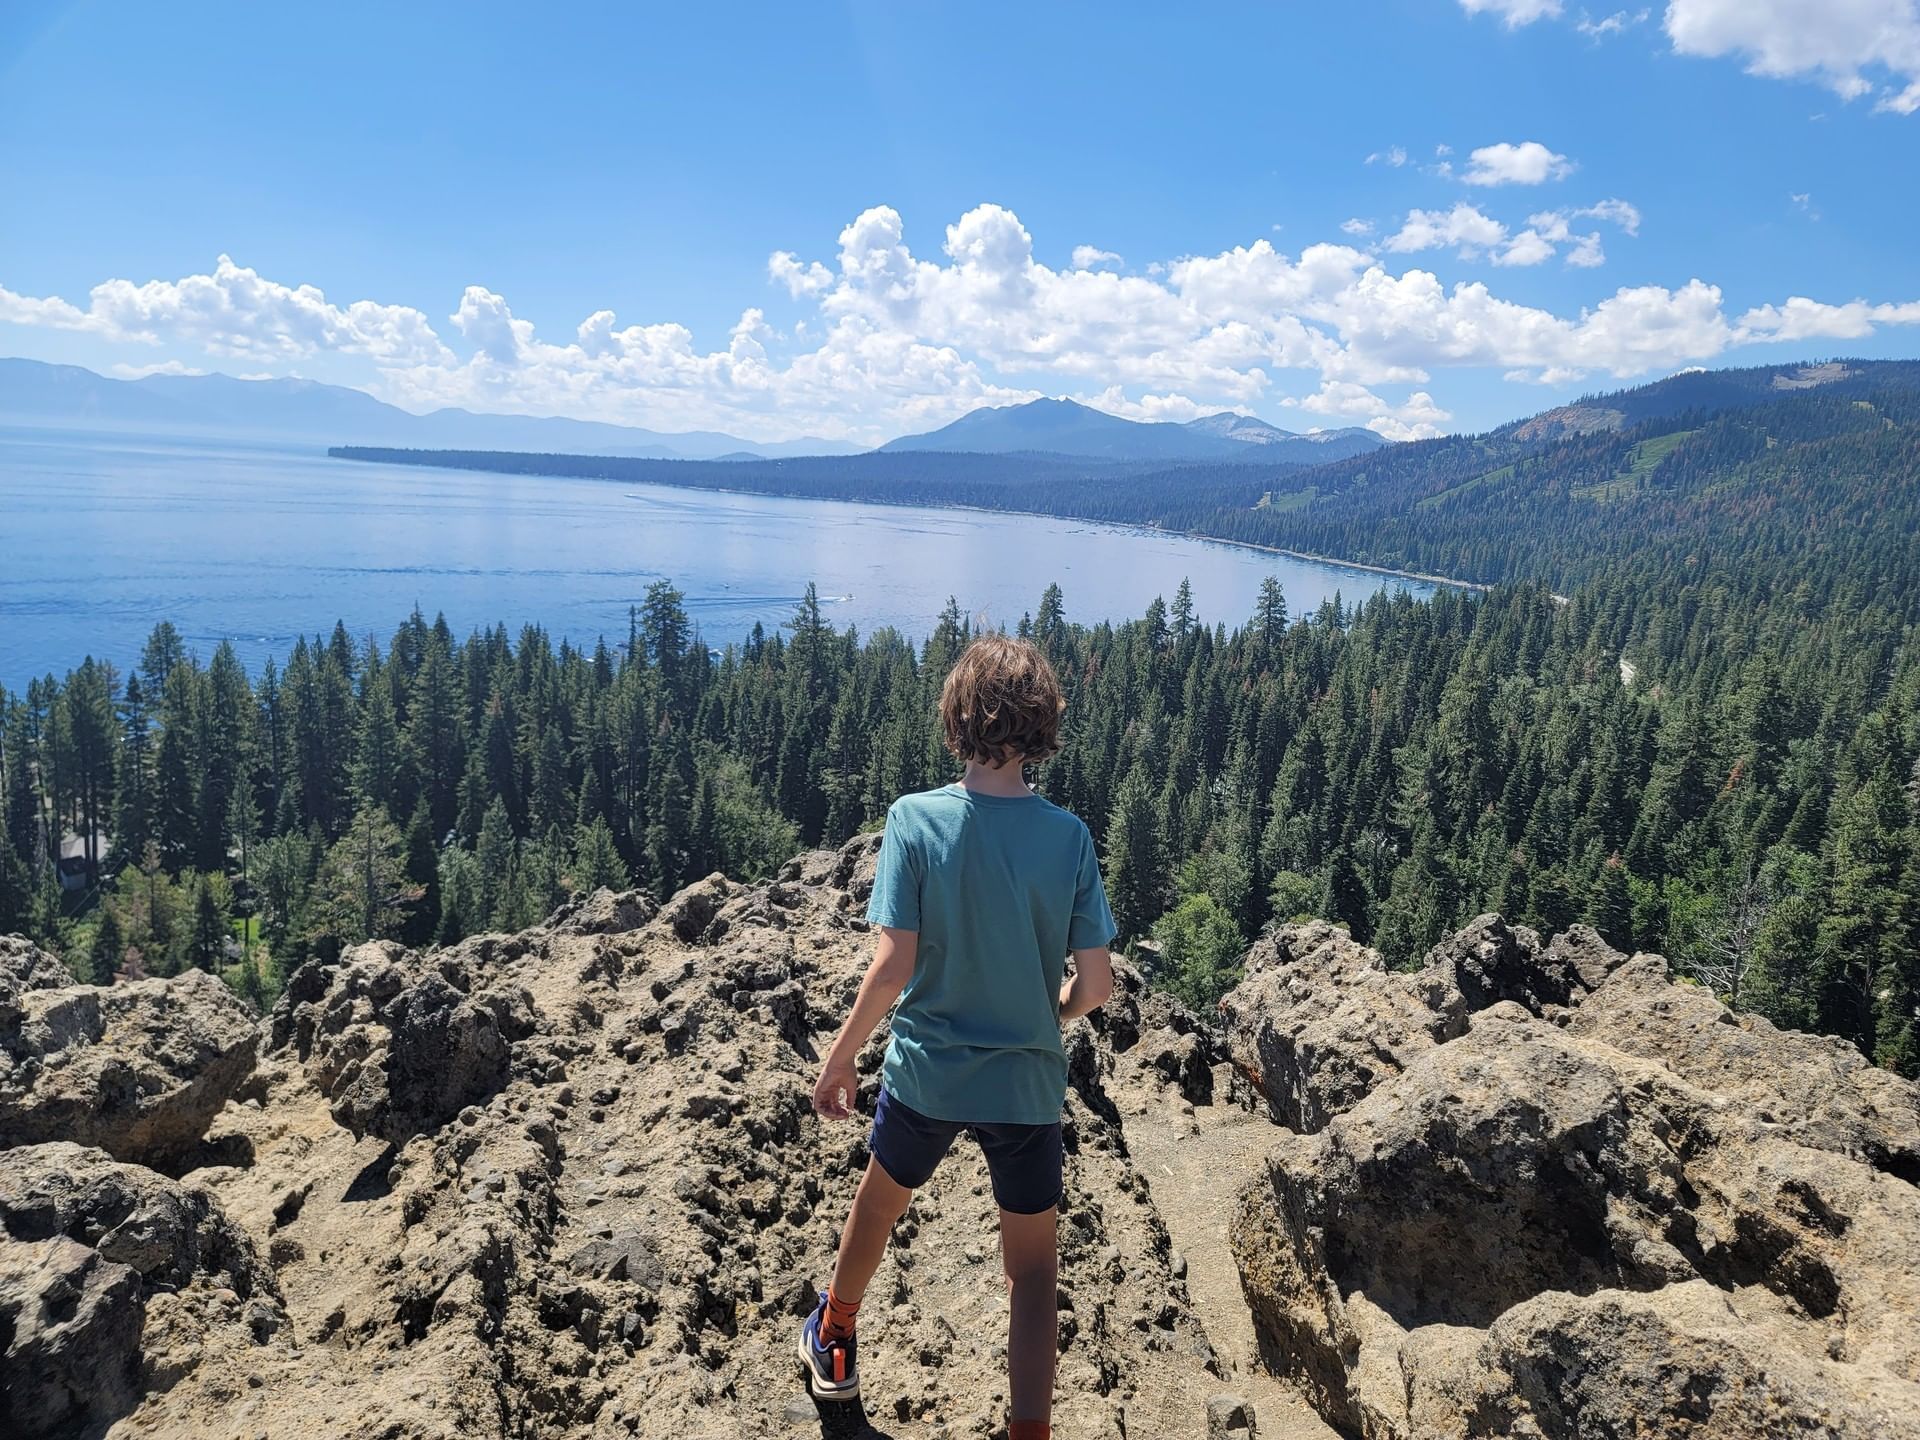 Child on top of Eagle Rock in Homewood, CA, overlooking panoramic view of Lake Tahoe